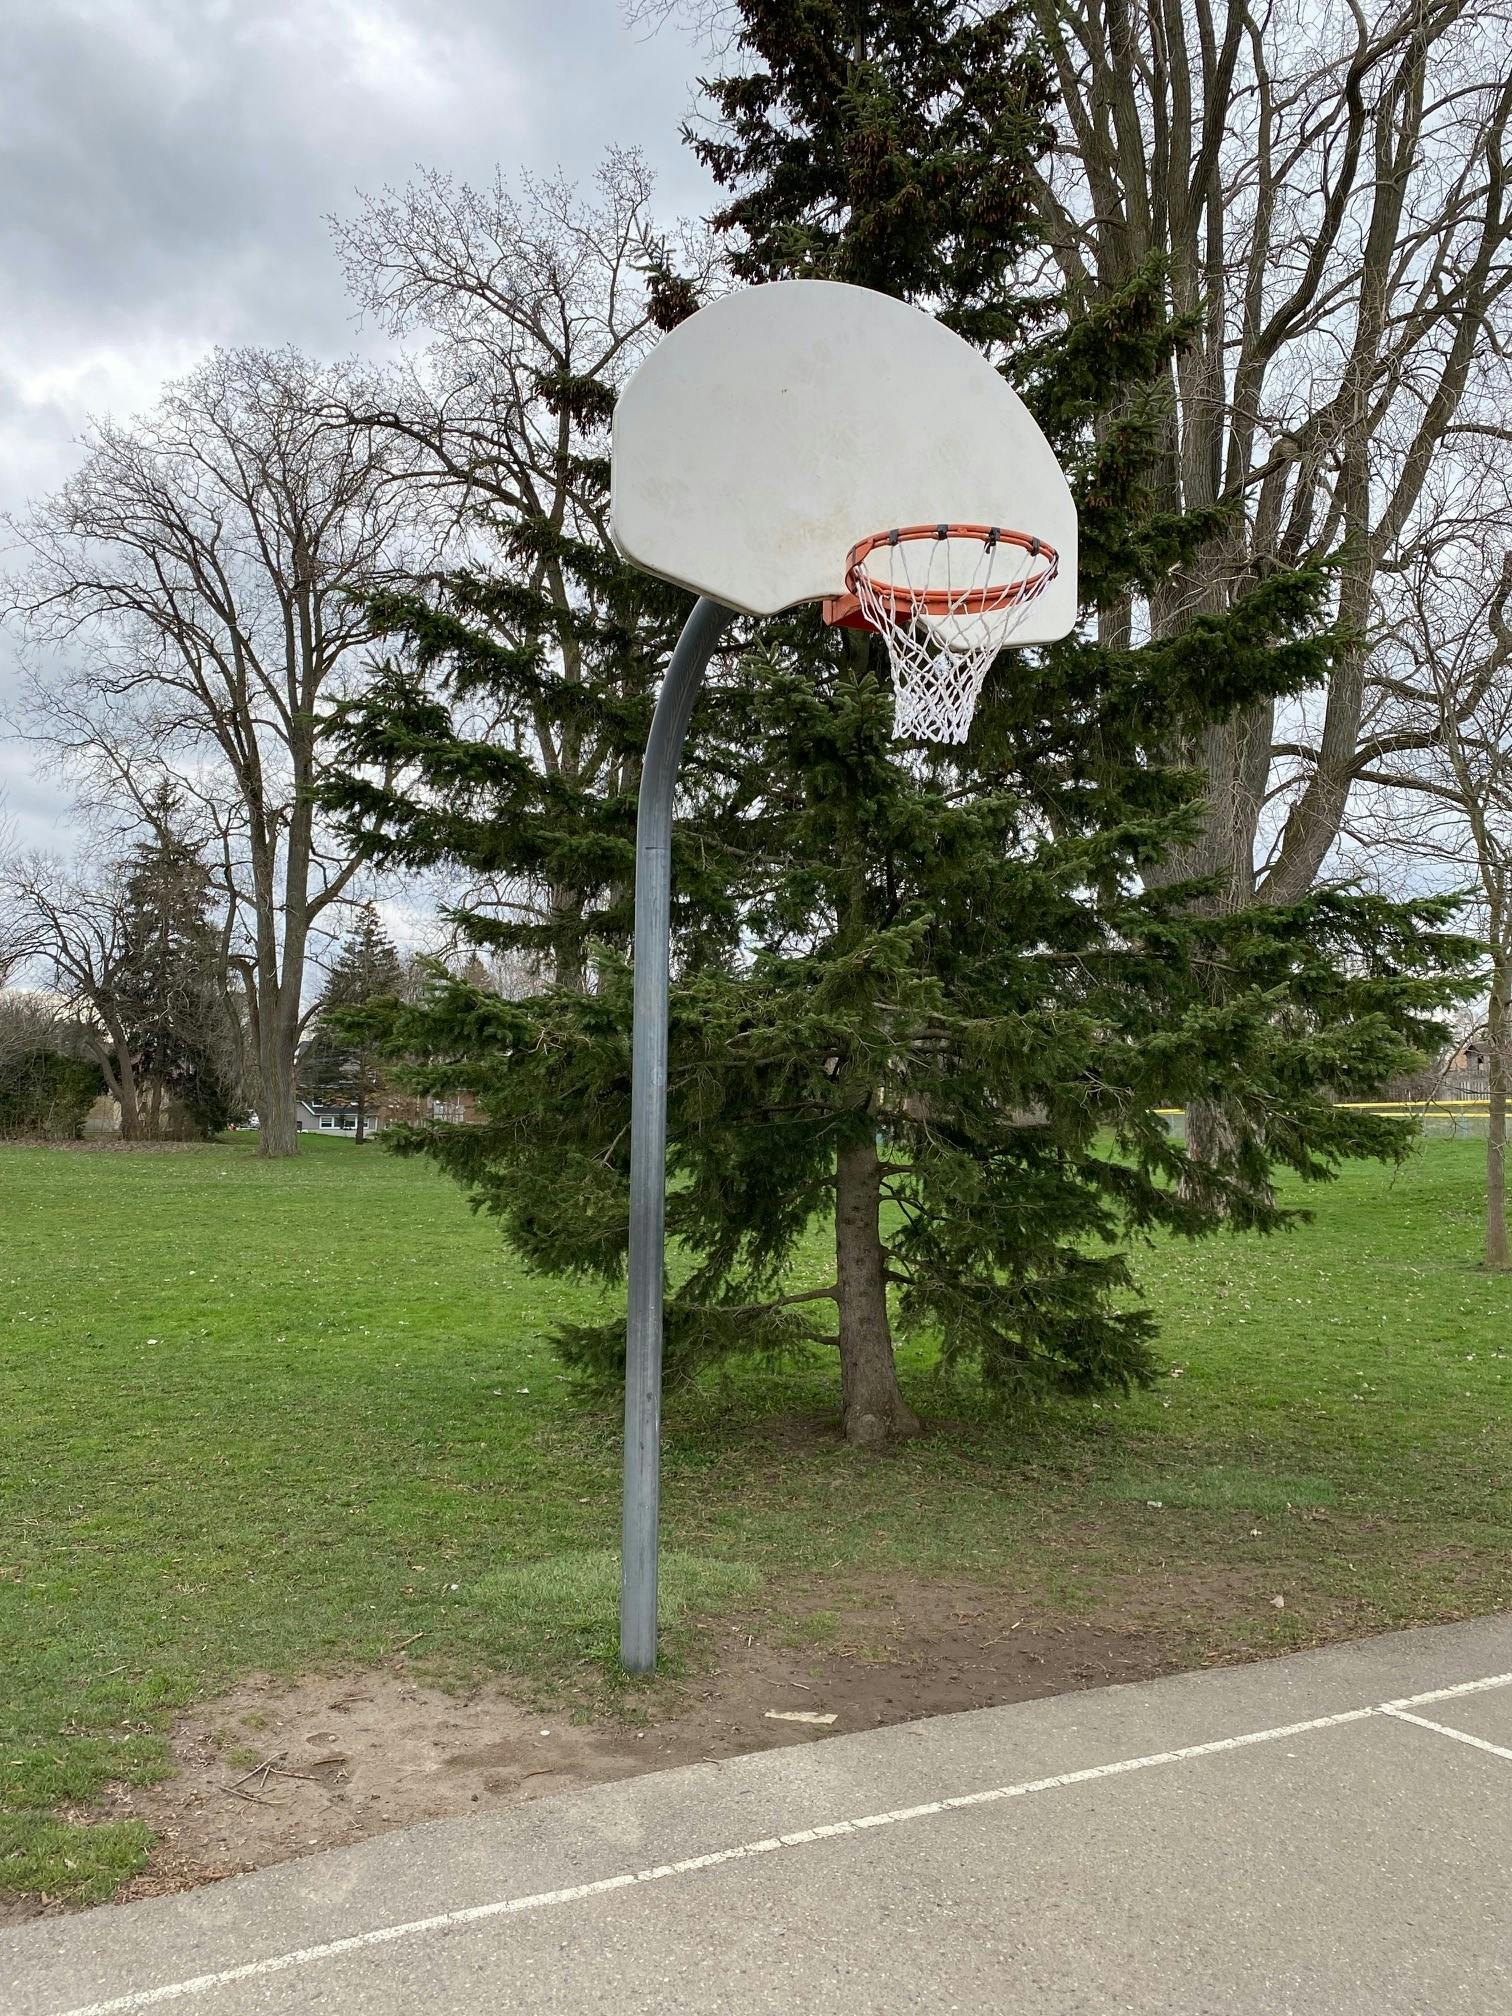 West Lions Park existing basketball court